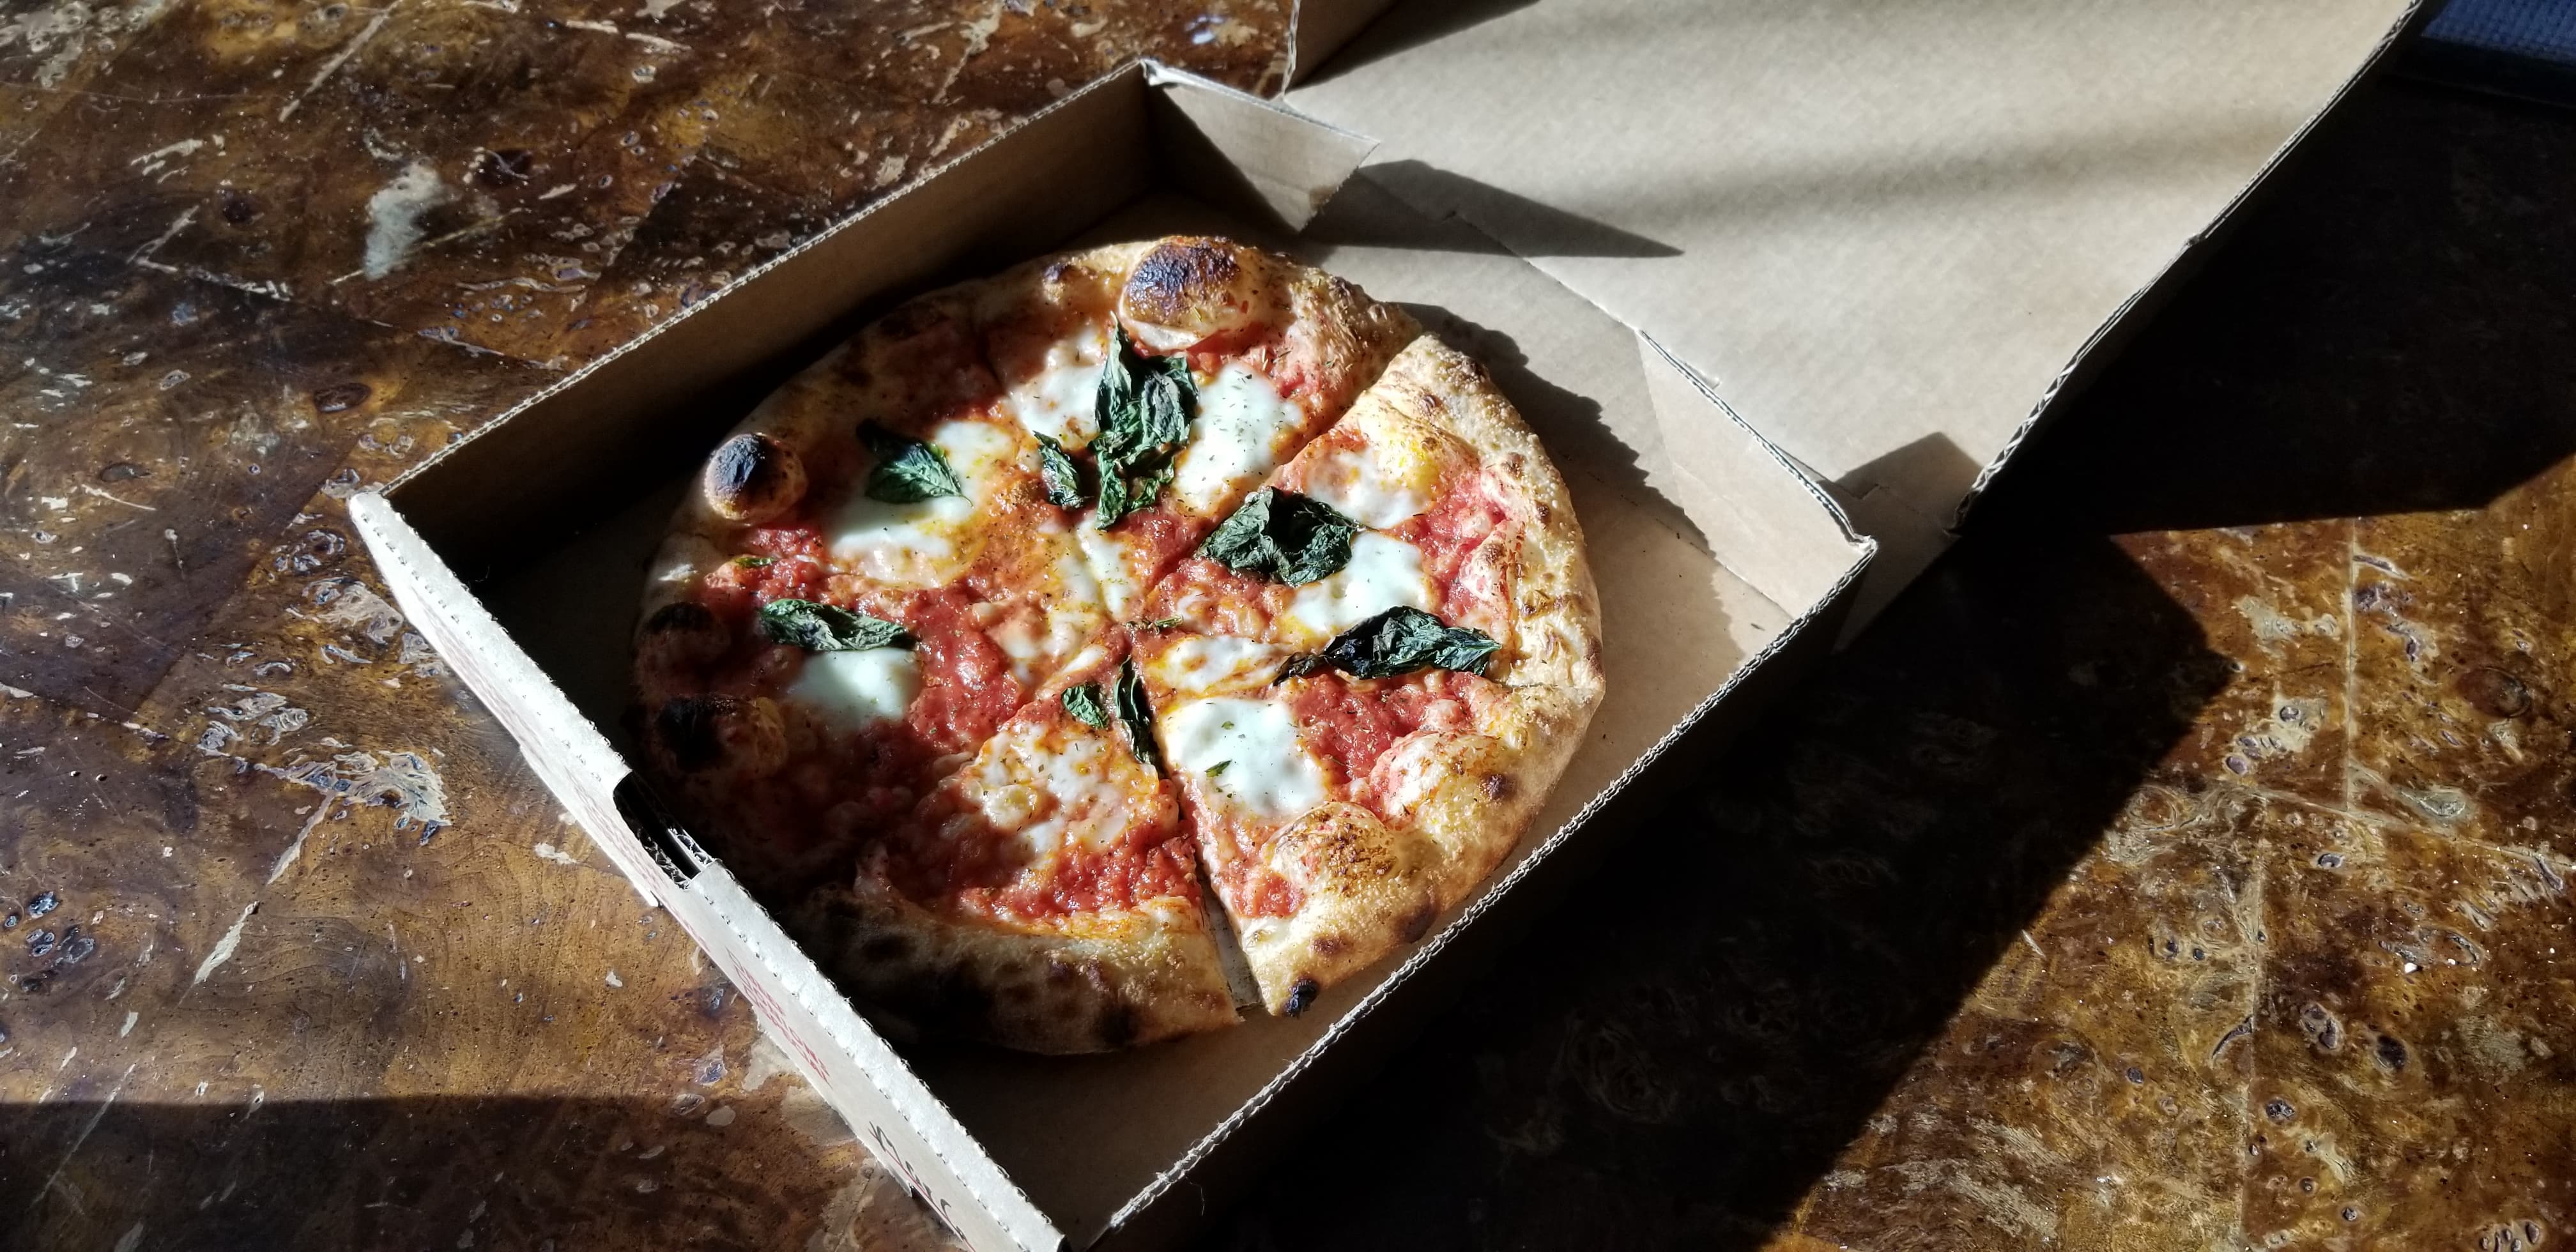 On a sunny brown table, there is a pizza in a paper box. Photo by Nina Hopkins.